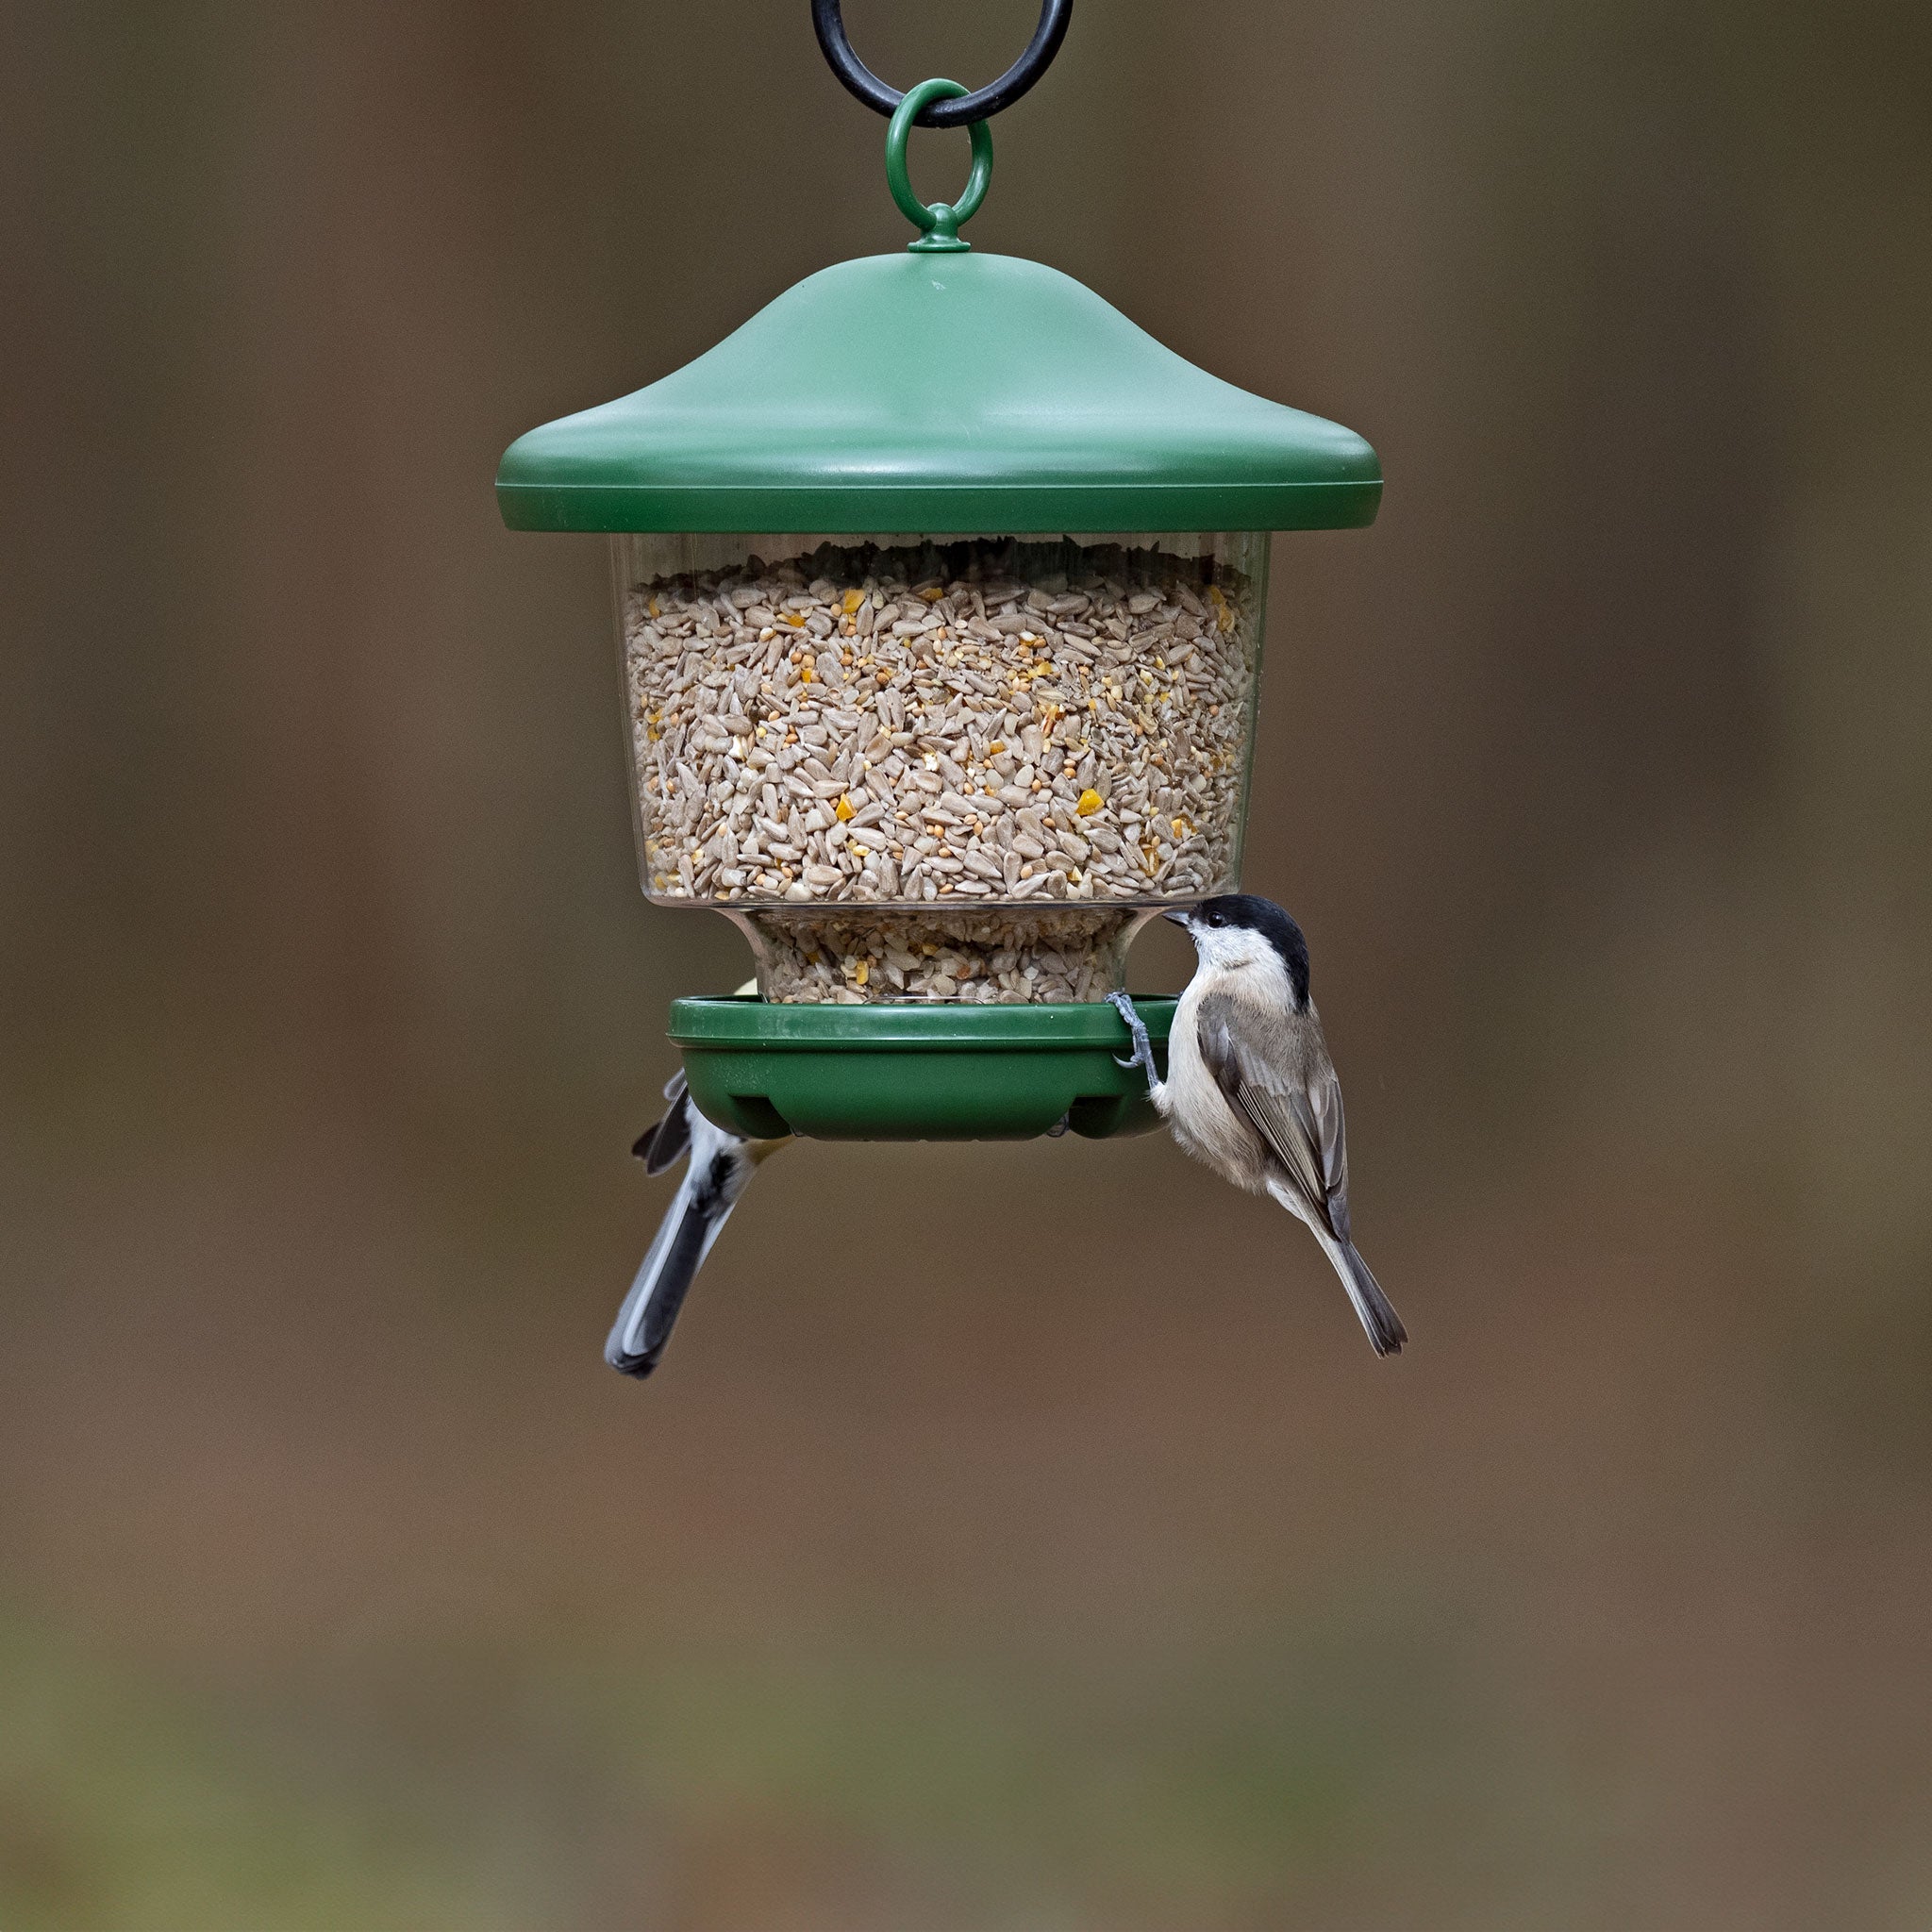 My Favourite Seed Feeder with birds